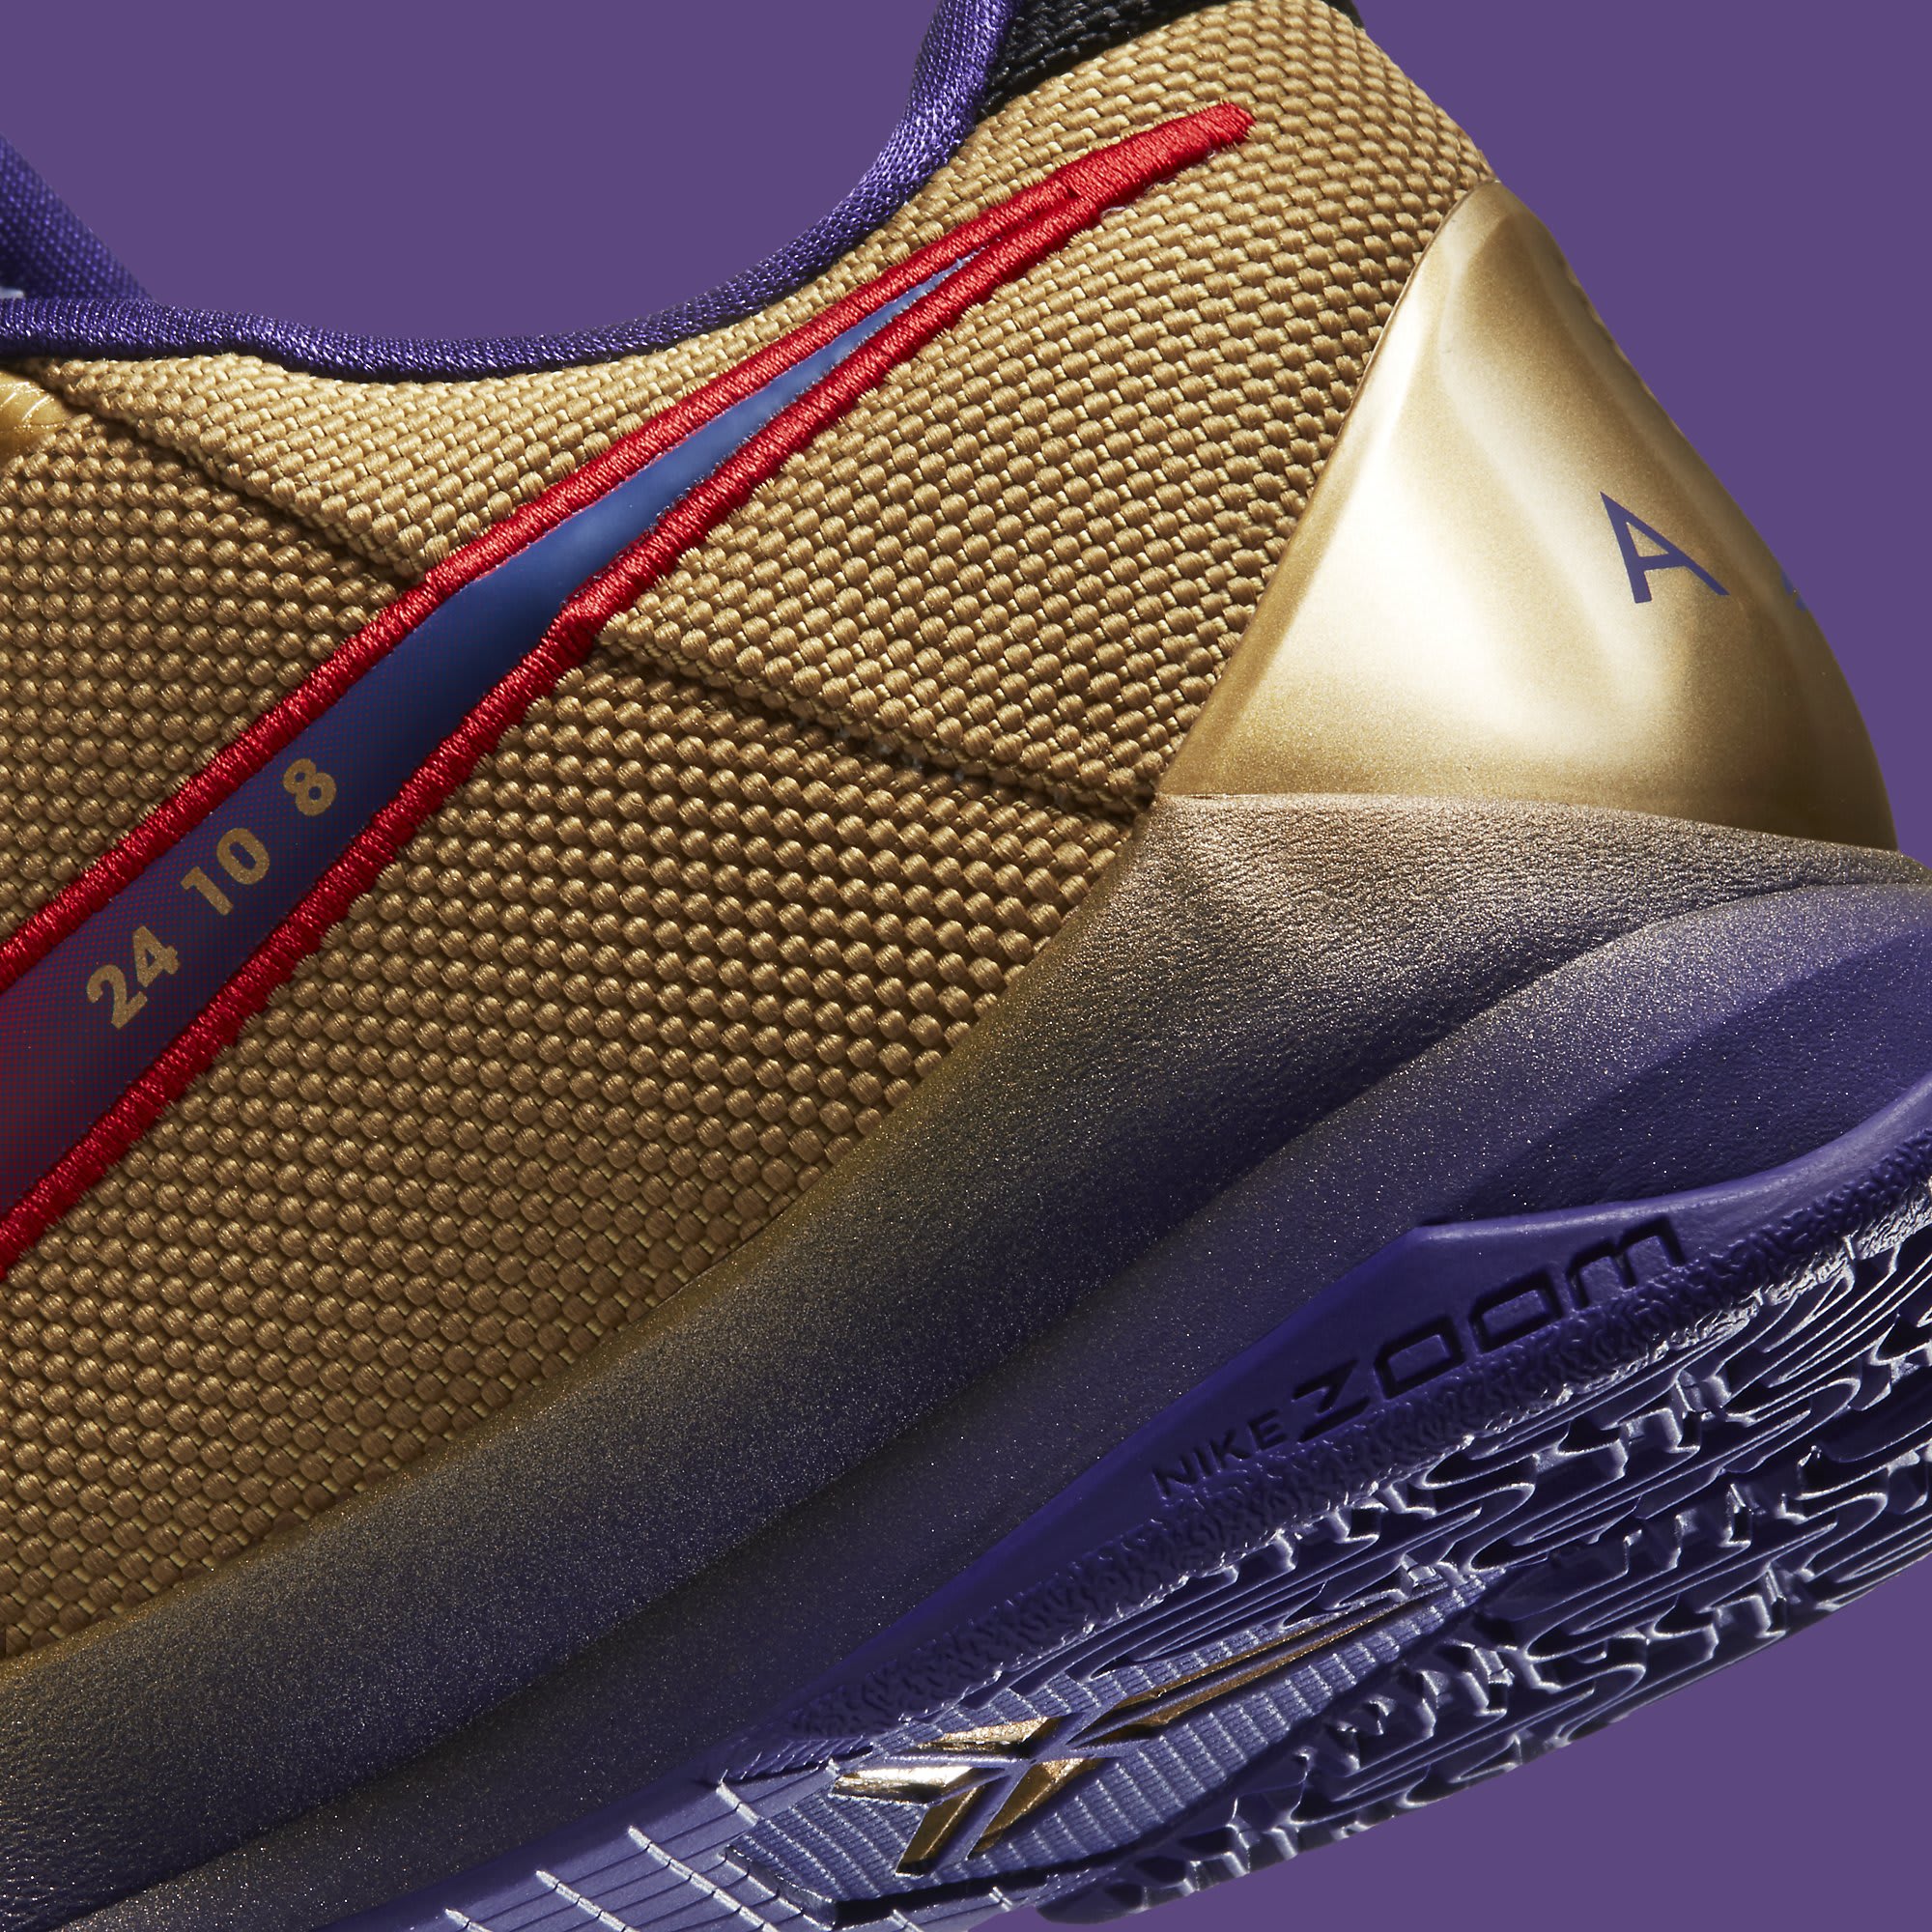 Undefeated x Nike Kobe 5 Gold Hall of Fame Release date DA6809-700 Heel Detail